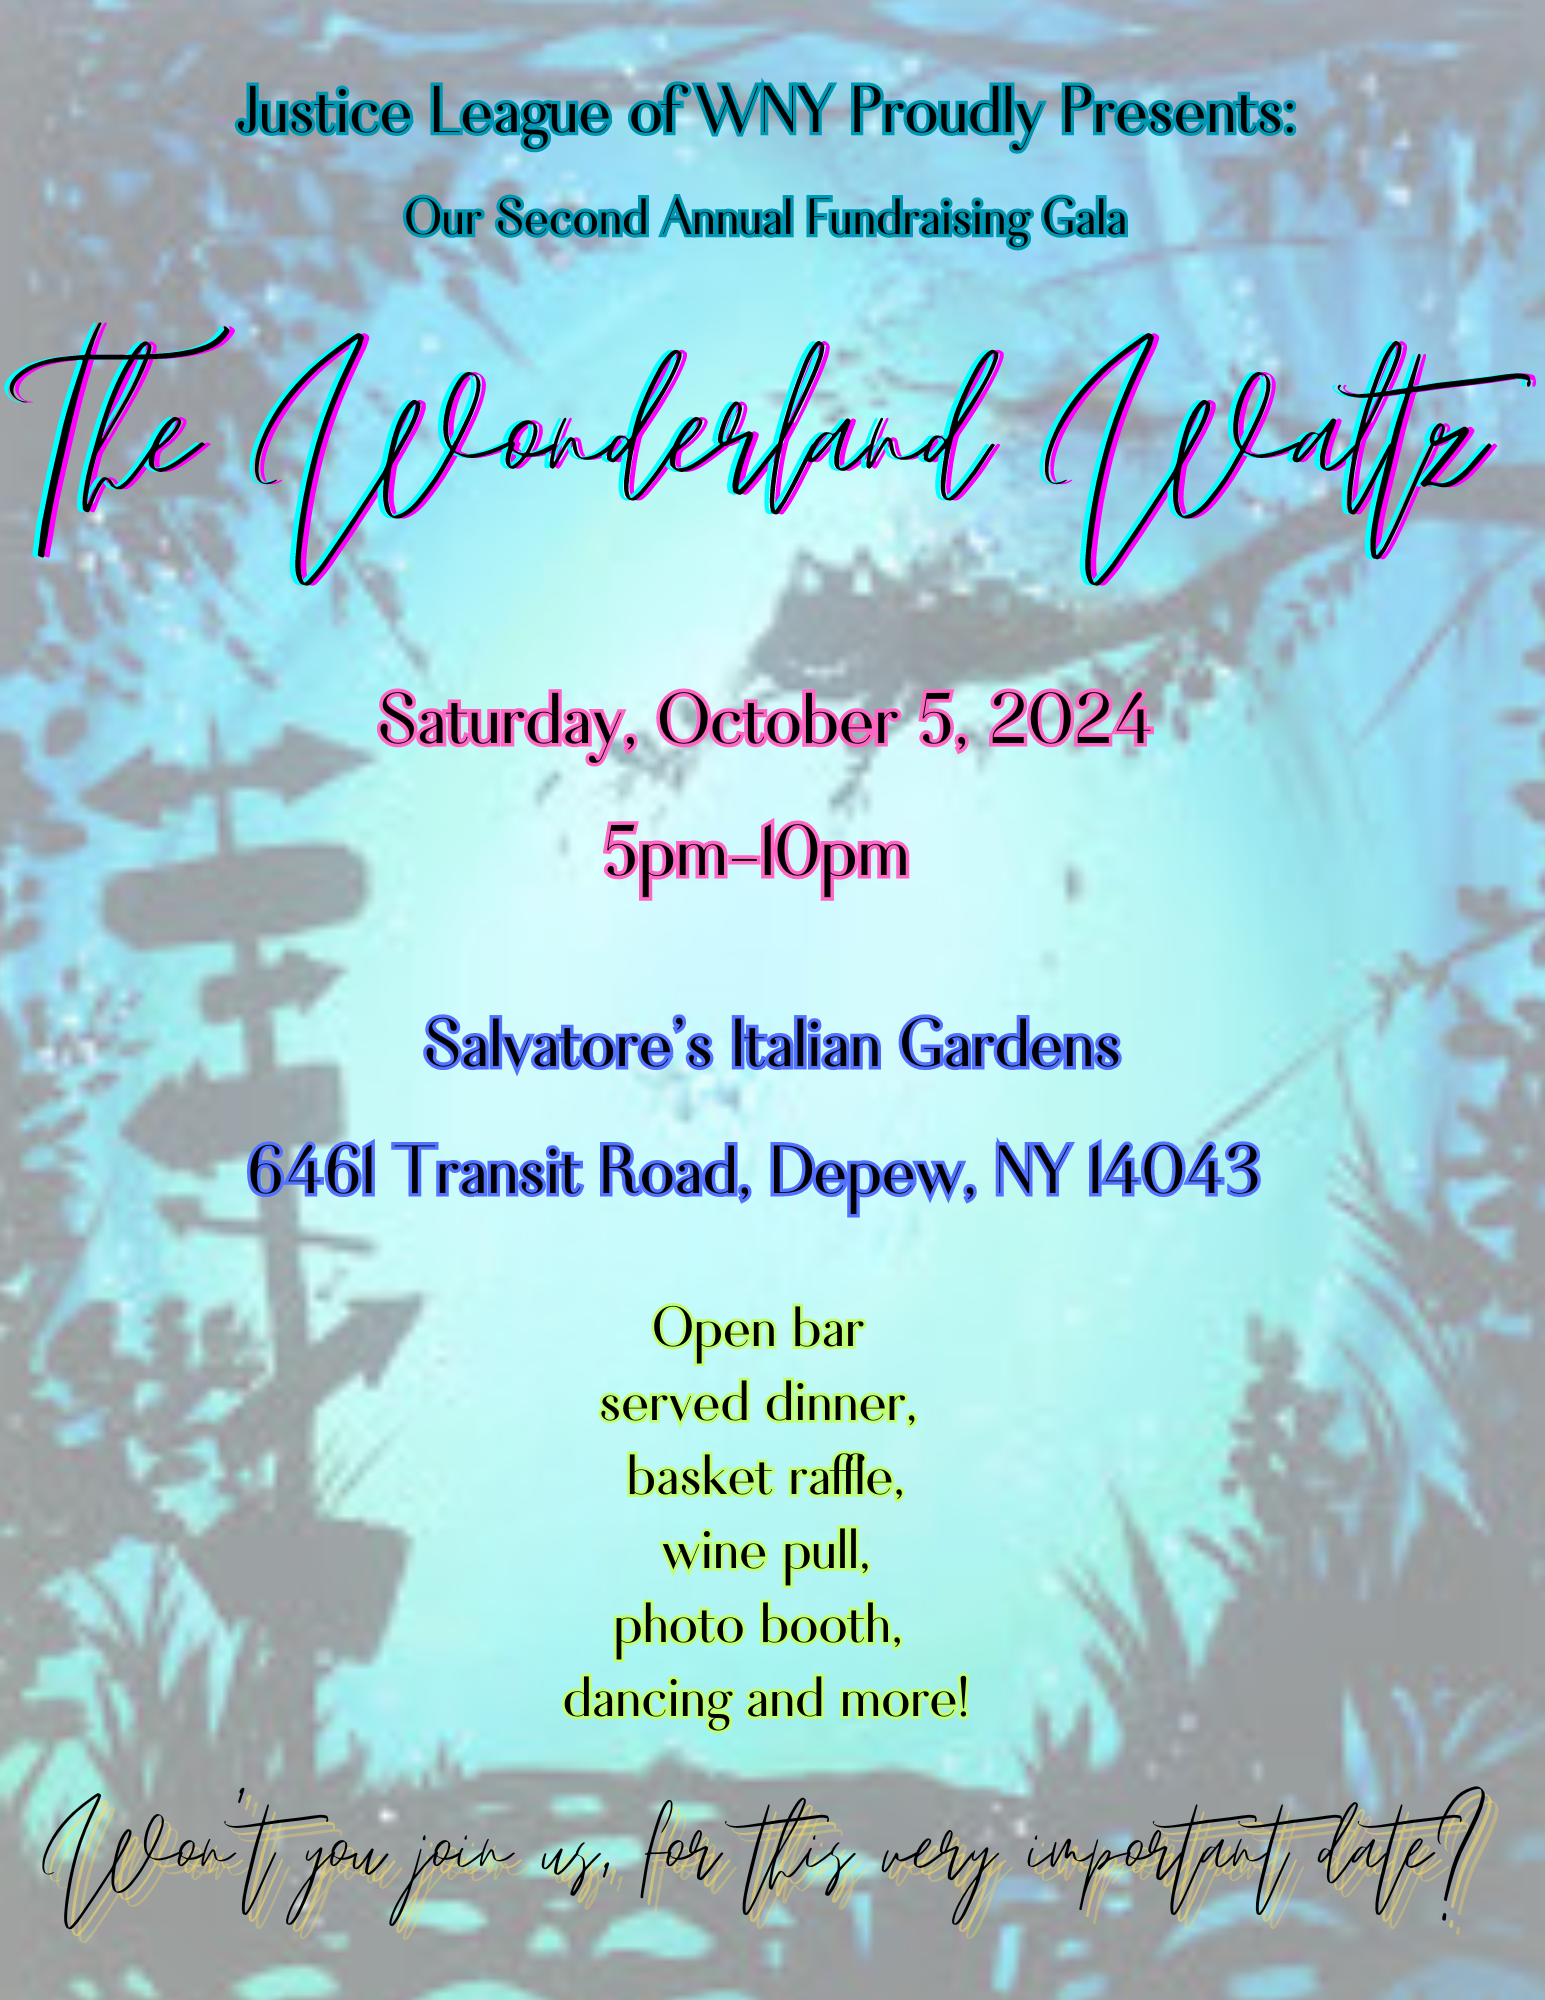 Wonderland Waltz Gala Charity Fundraiser Join us on October 5th 2024 at 5:00PM at Salvatore's Italian Garden's, Depew, NY 14043. Cocktails start at 5:00PM with a silent auction, raffle items, and dinner to follow. 